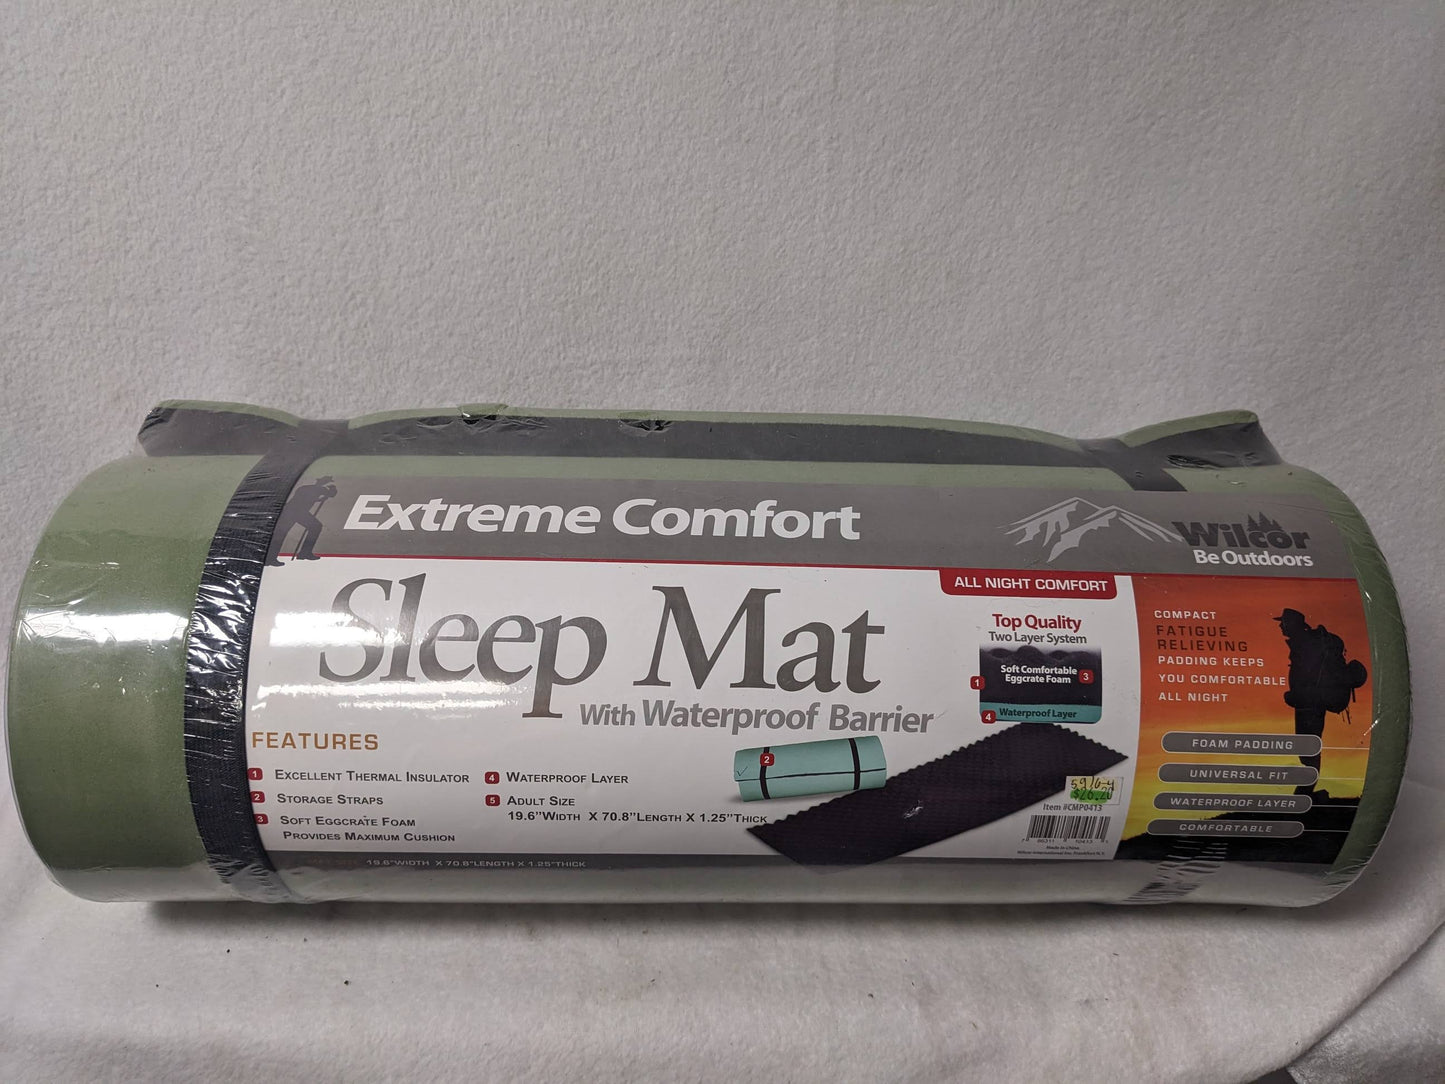 Wilcor Extreme Comfort Sleeping Mat With Waterproof Barrier Adult Size 19.6 - 70.8